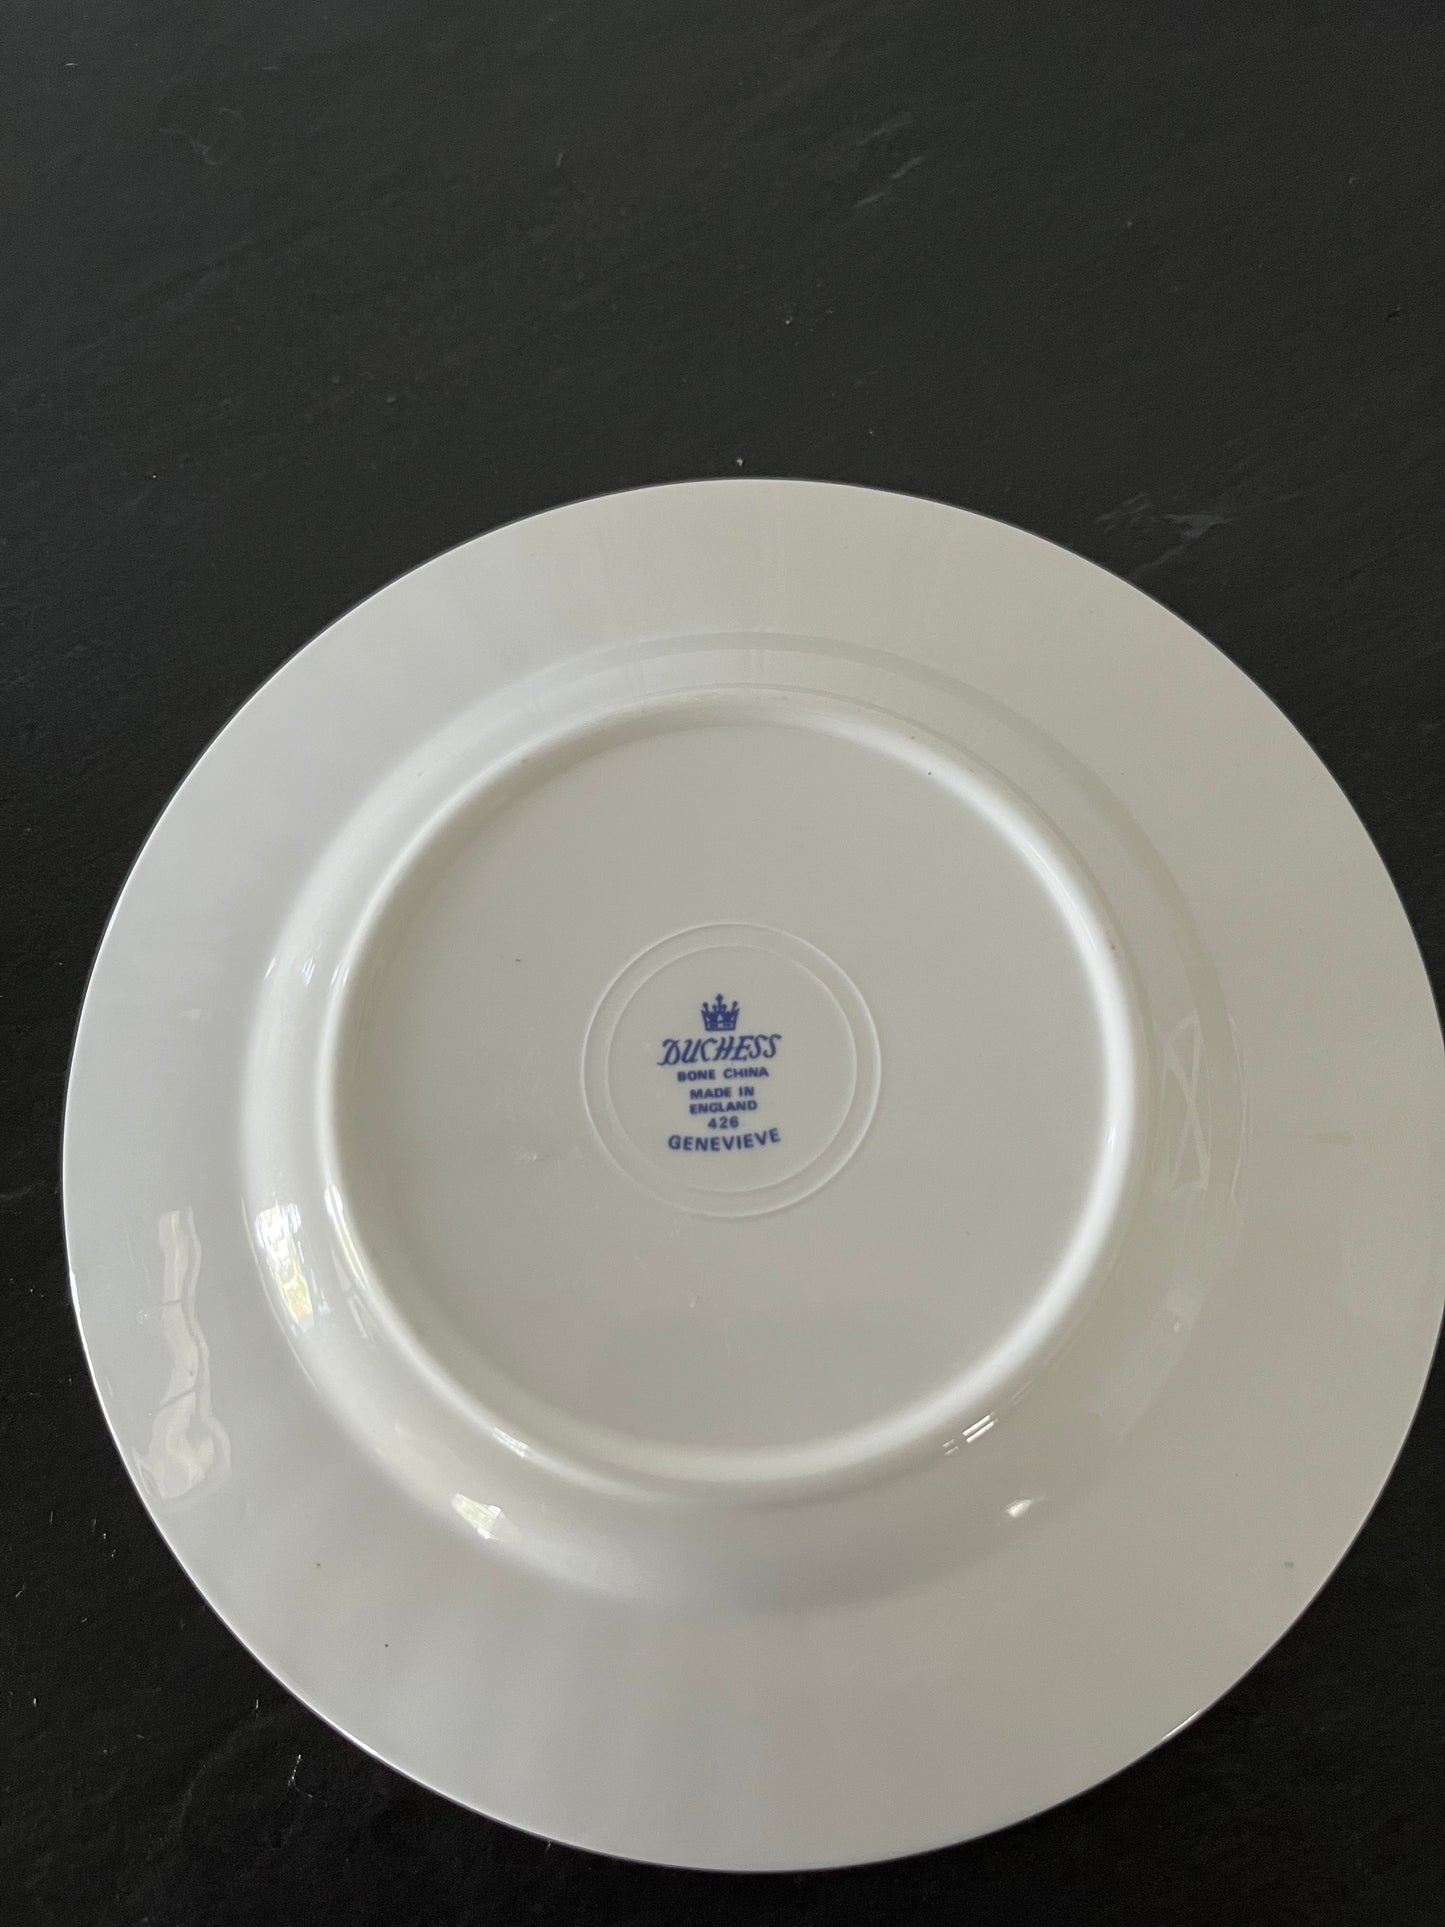 Vintage Blue and White Duchess Genevieve Bread and Butter Plate - 6.5 Inches